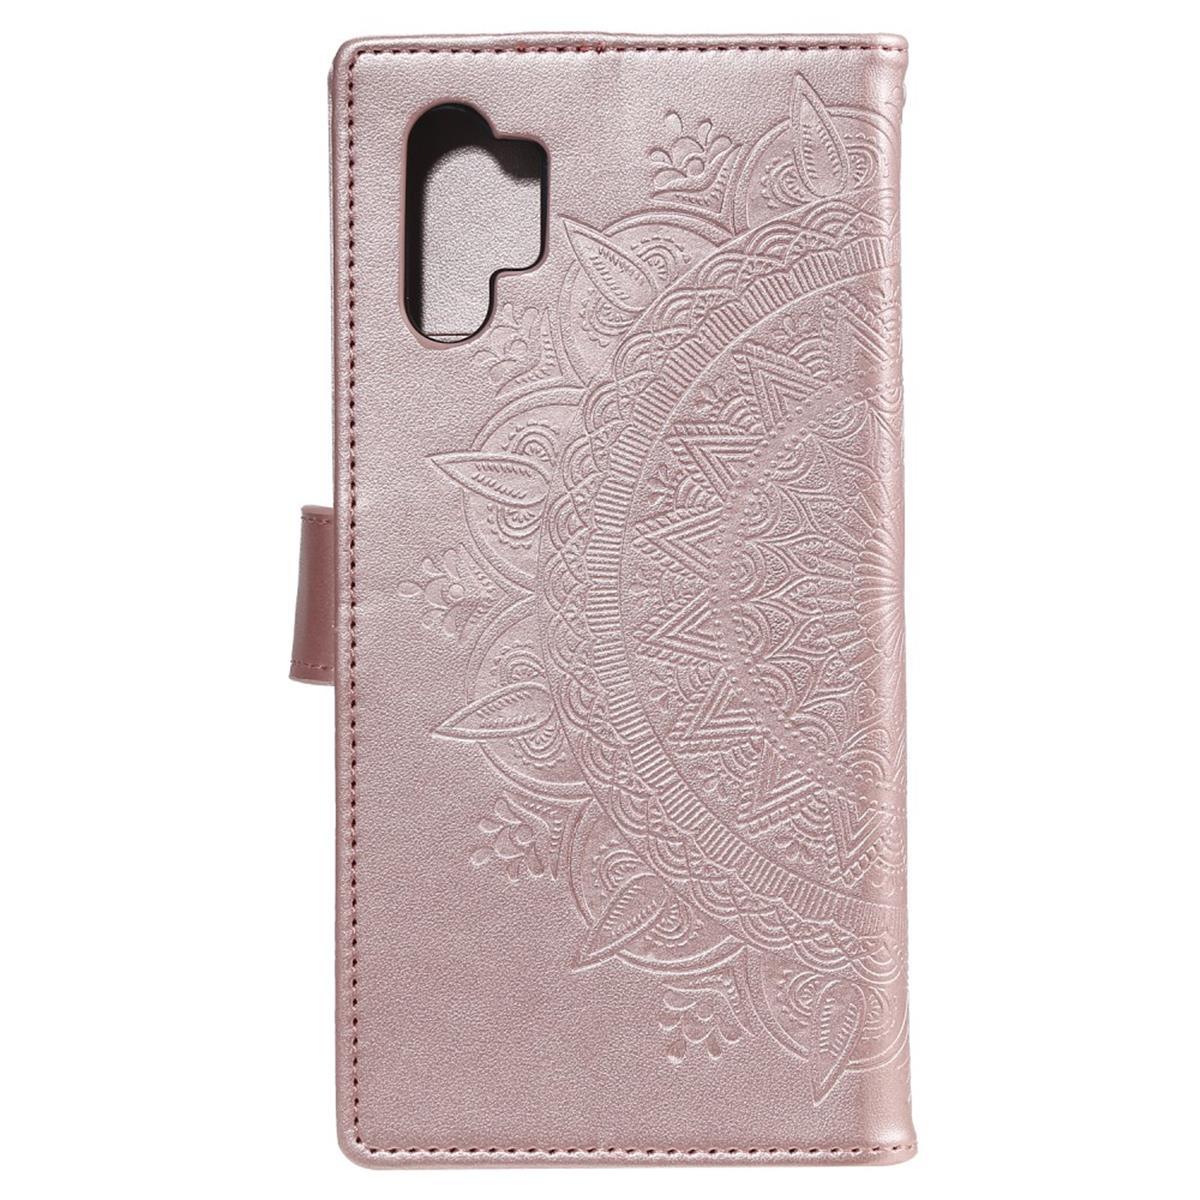 Muster, Samsung, Roségold mit Bookcover, COVERKINGZ Mandala 4G, A32 Galaxy Klapphülle